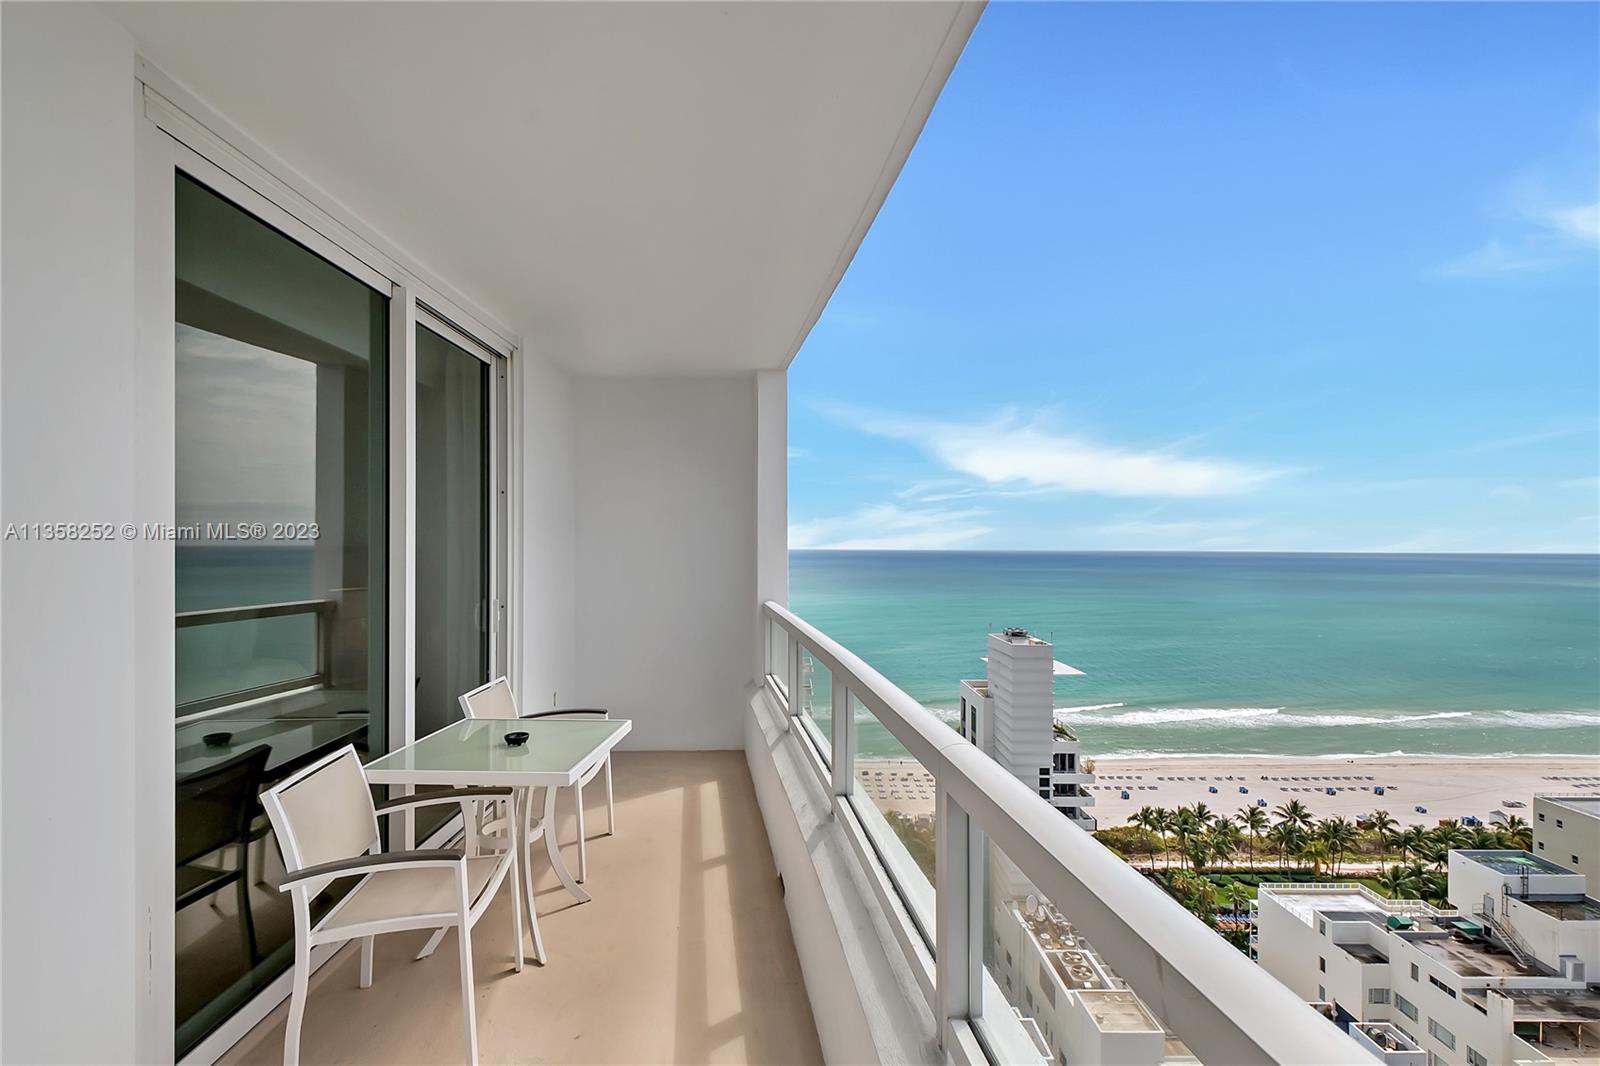 4401  Collins Ave #2406 For Sale A11358252, FL